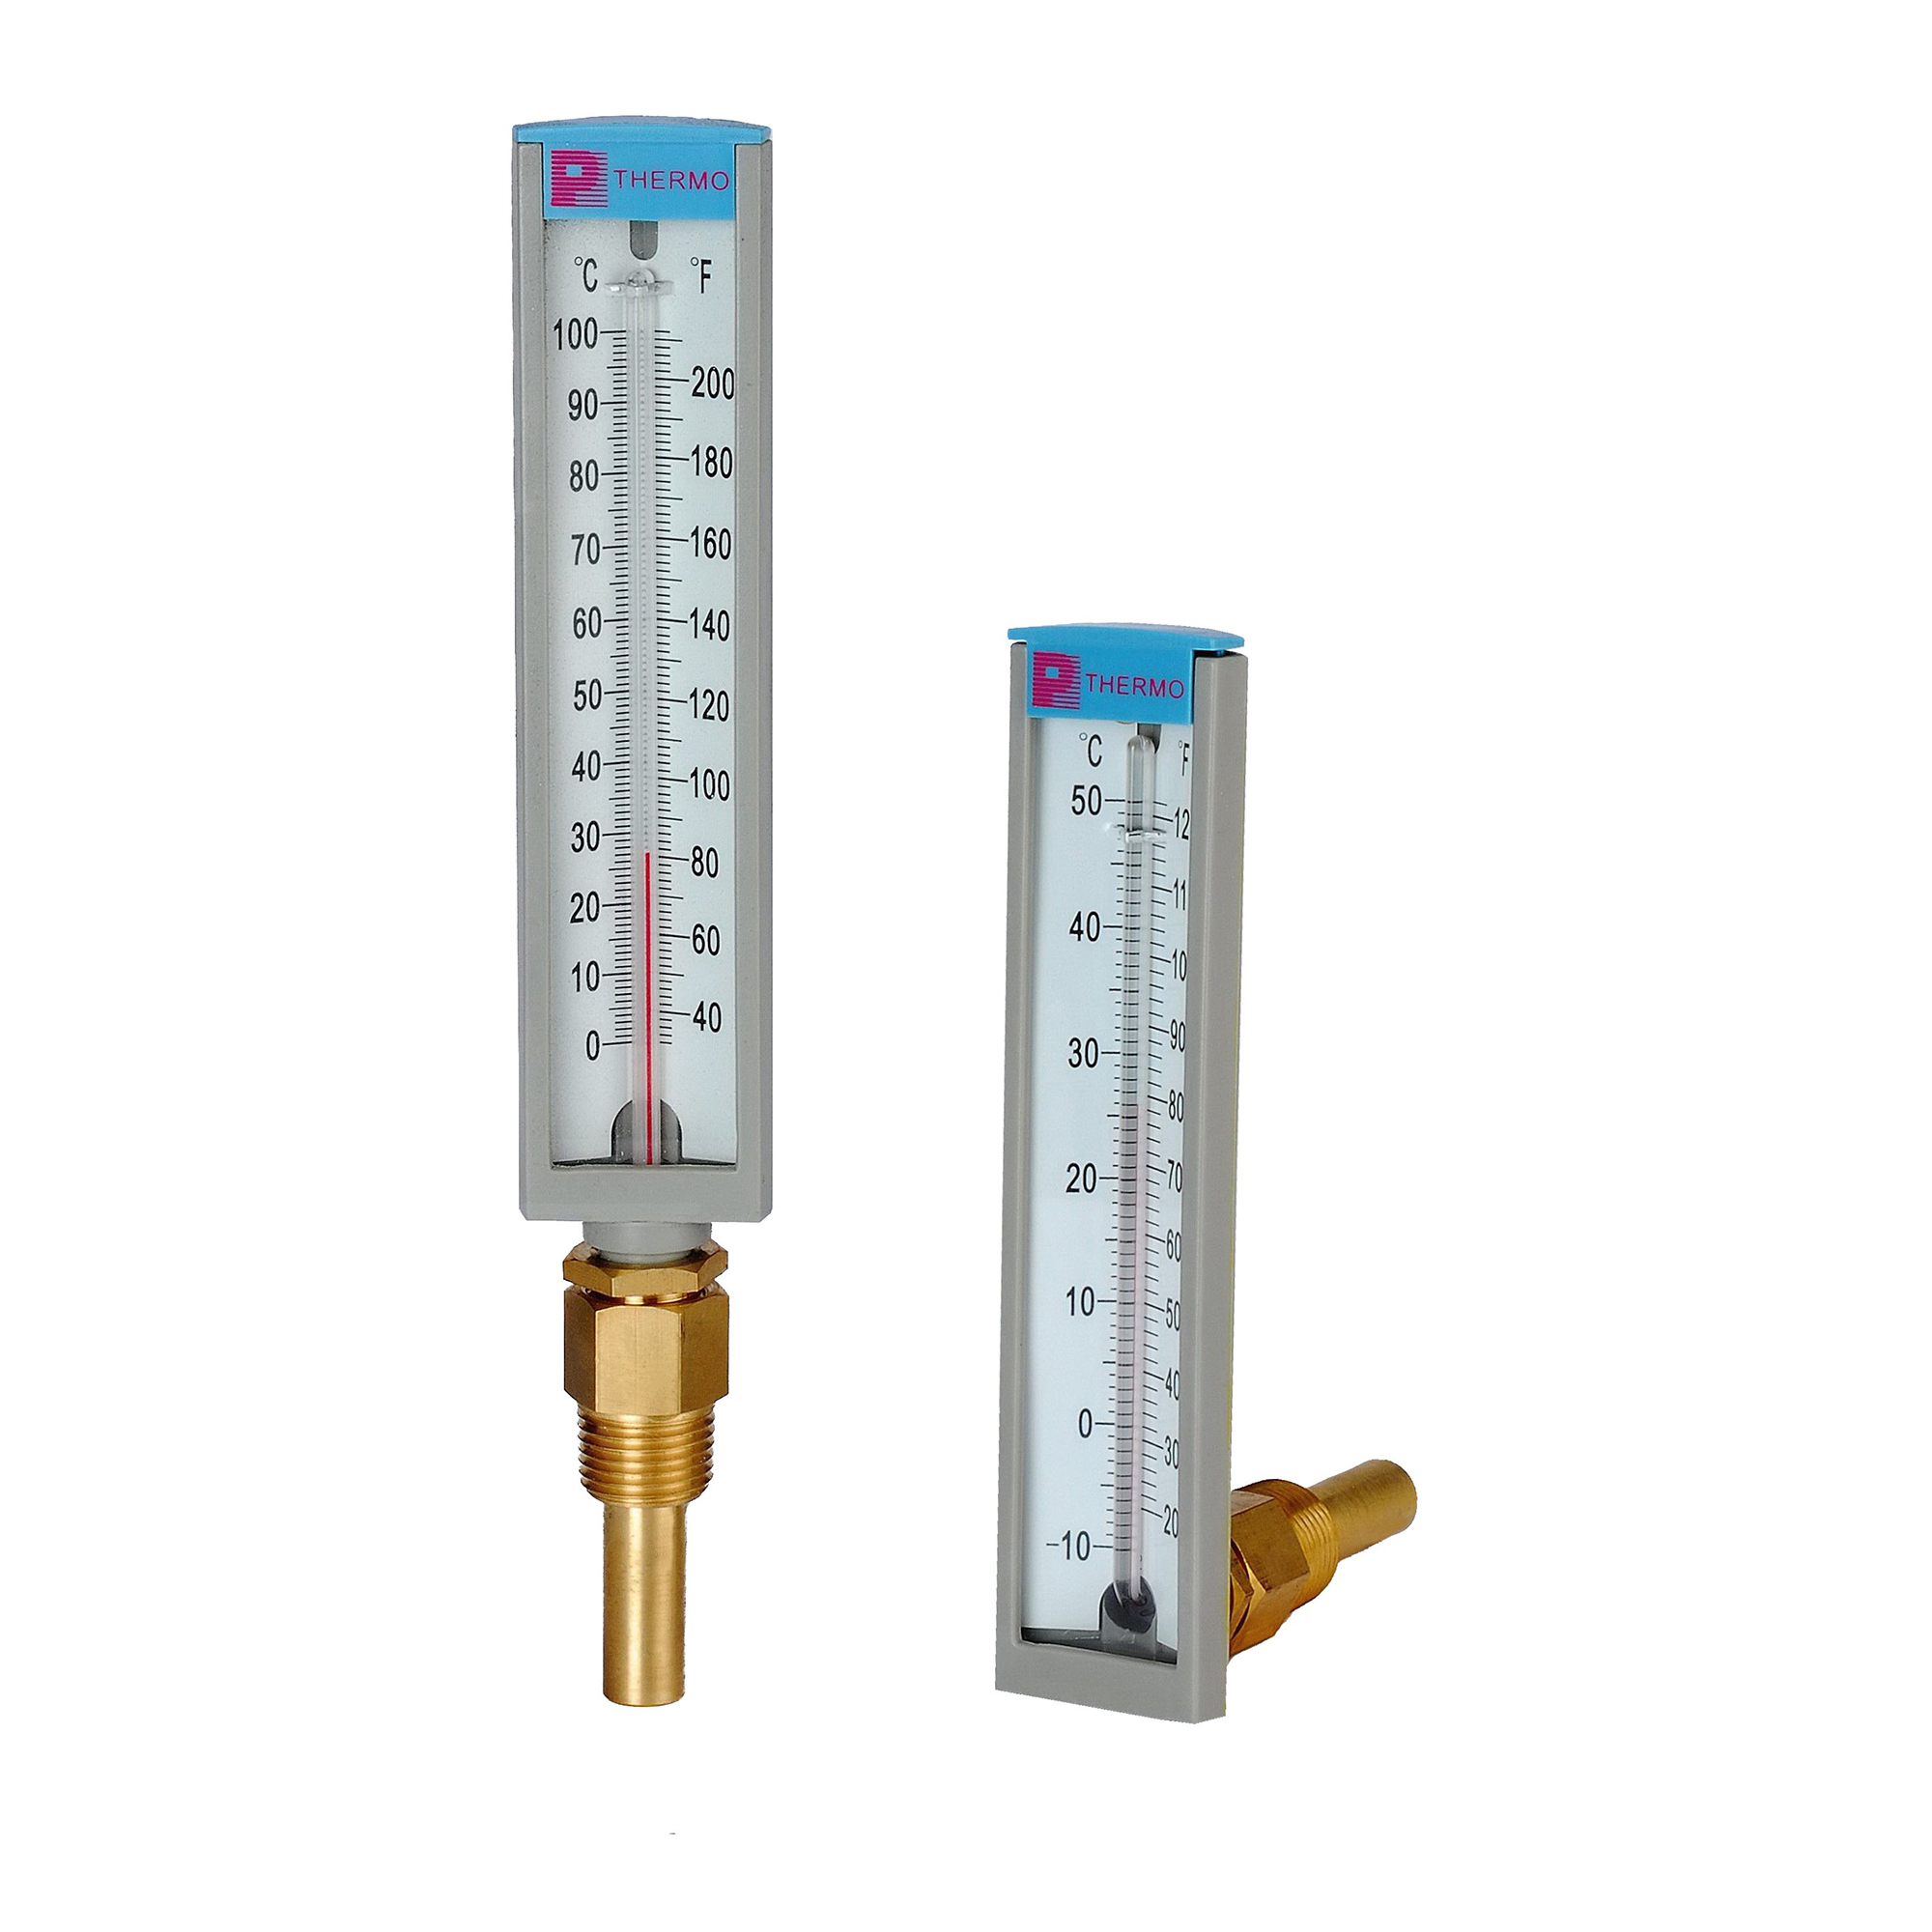 Glass tube industrial thermometer, C300 SERIES